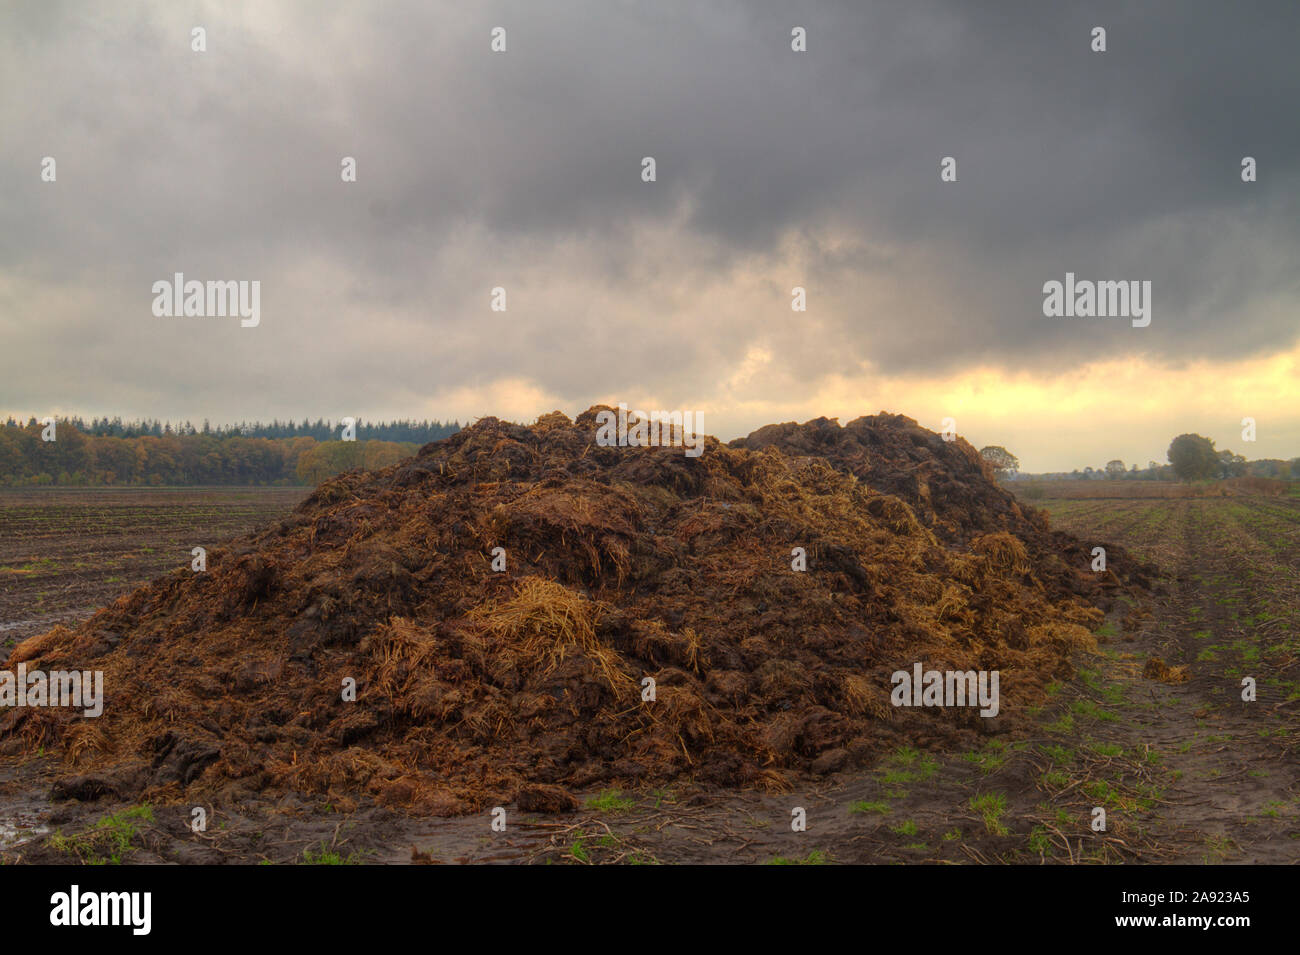 Organic farming: heap of manure mixed with straw on a field Stock Photo